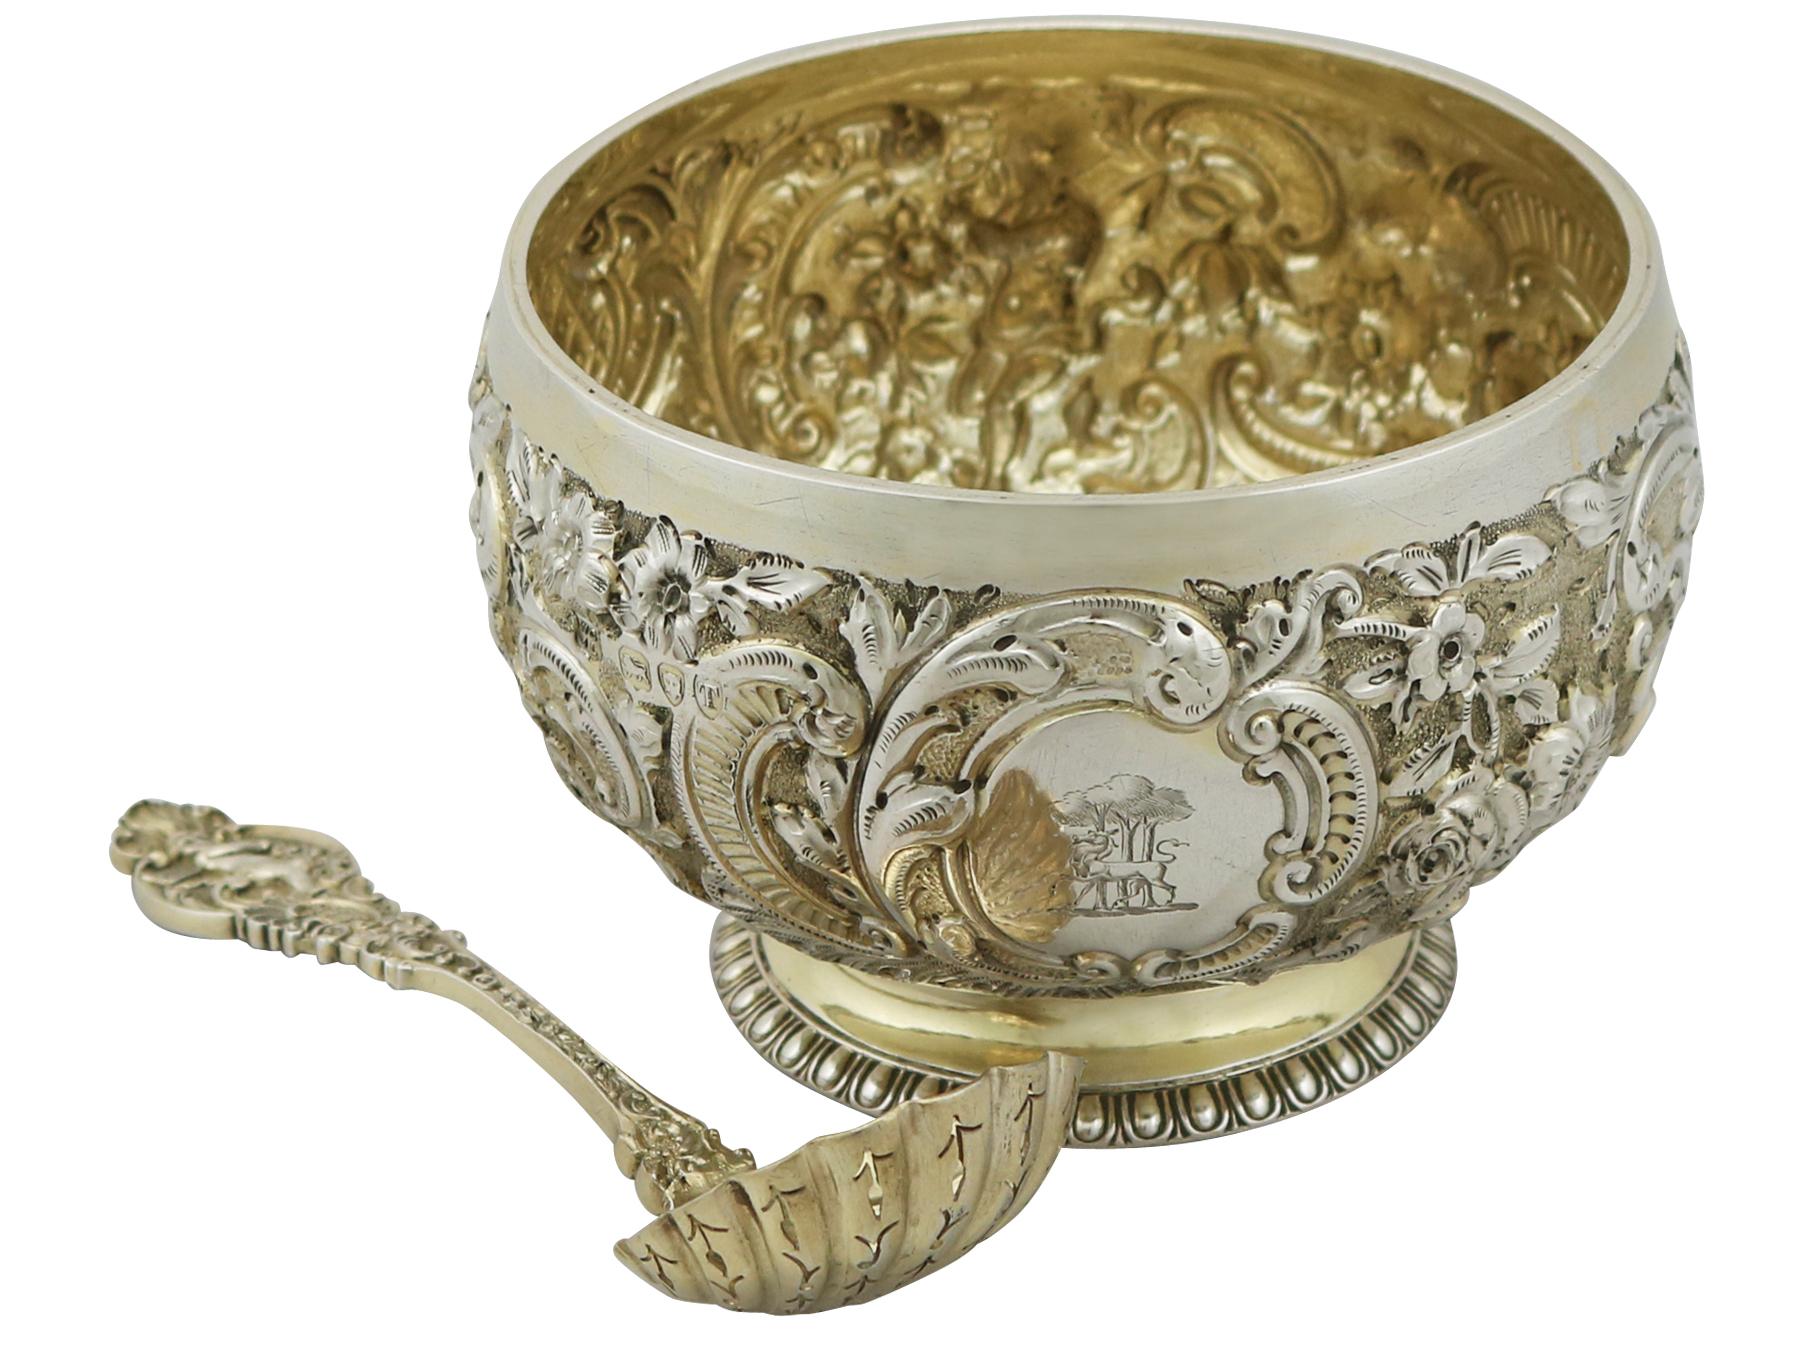 An exceptional, fine and impressive antique Victorian English sterling silver sugar sifter spoon and bowl - boxed; an addition to our silver teaware collection.

This exceptional antique Victorian sterling silver gilt teaware set consists of a